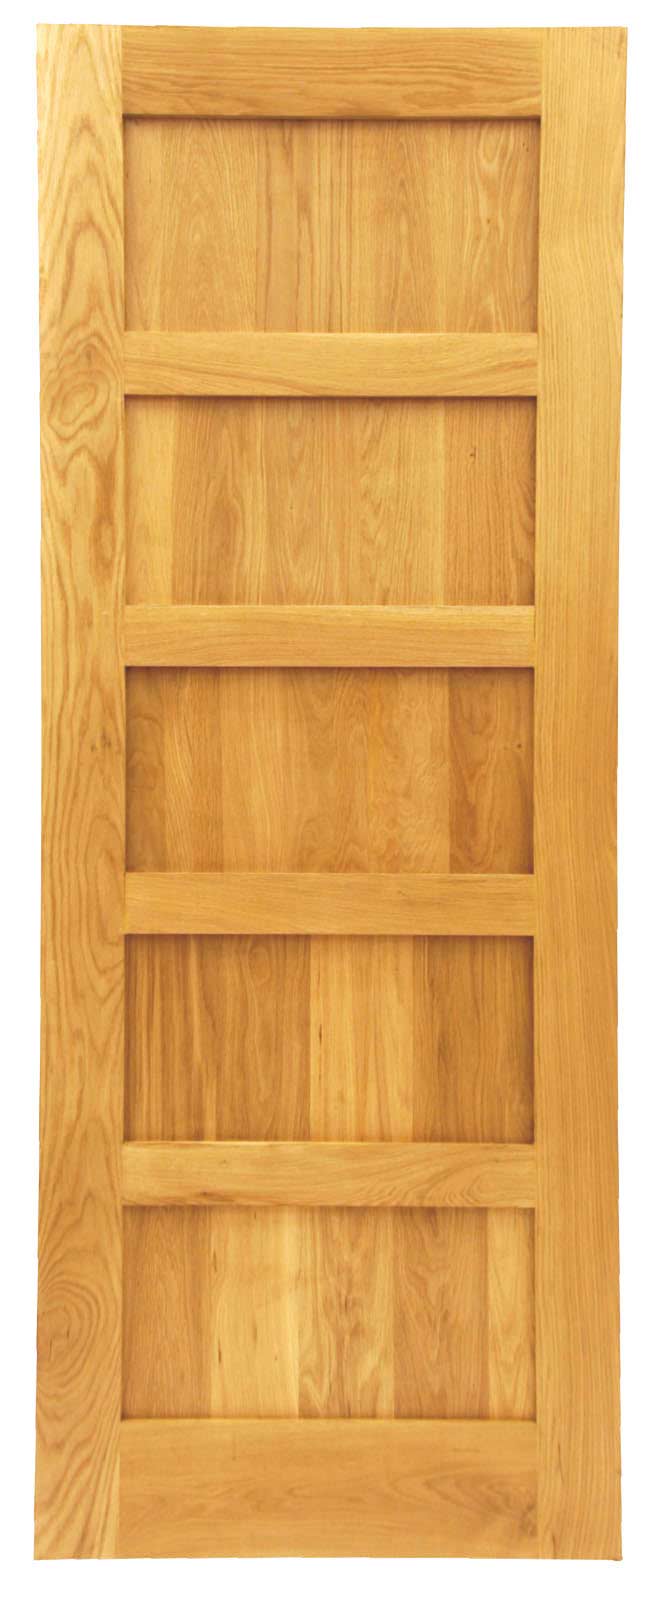 An image of Five Panel Shaker Style Solid Oak Door - Constructed With Mortice And Tennon Joi...